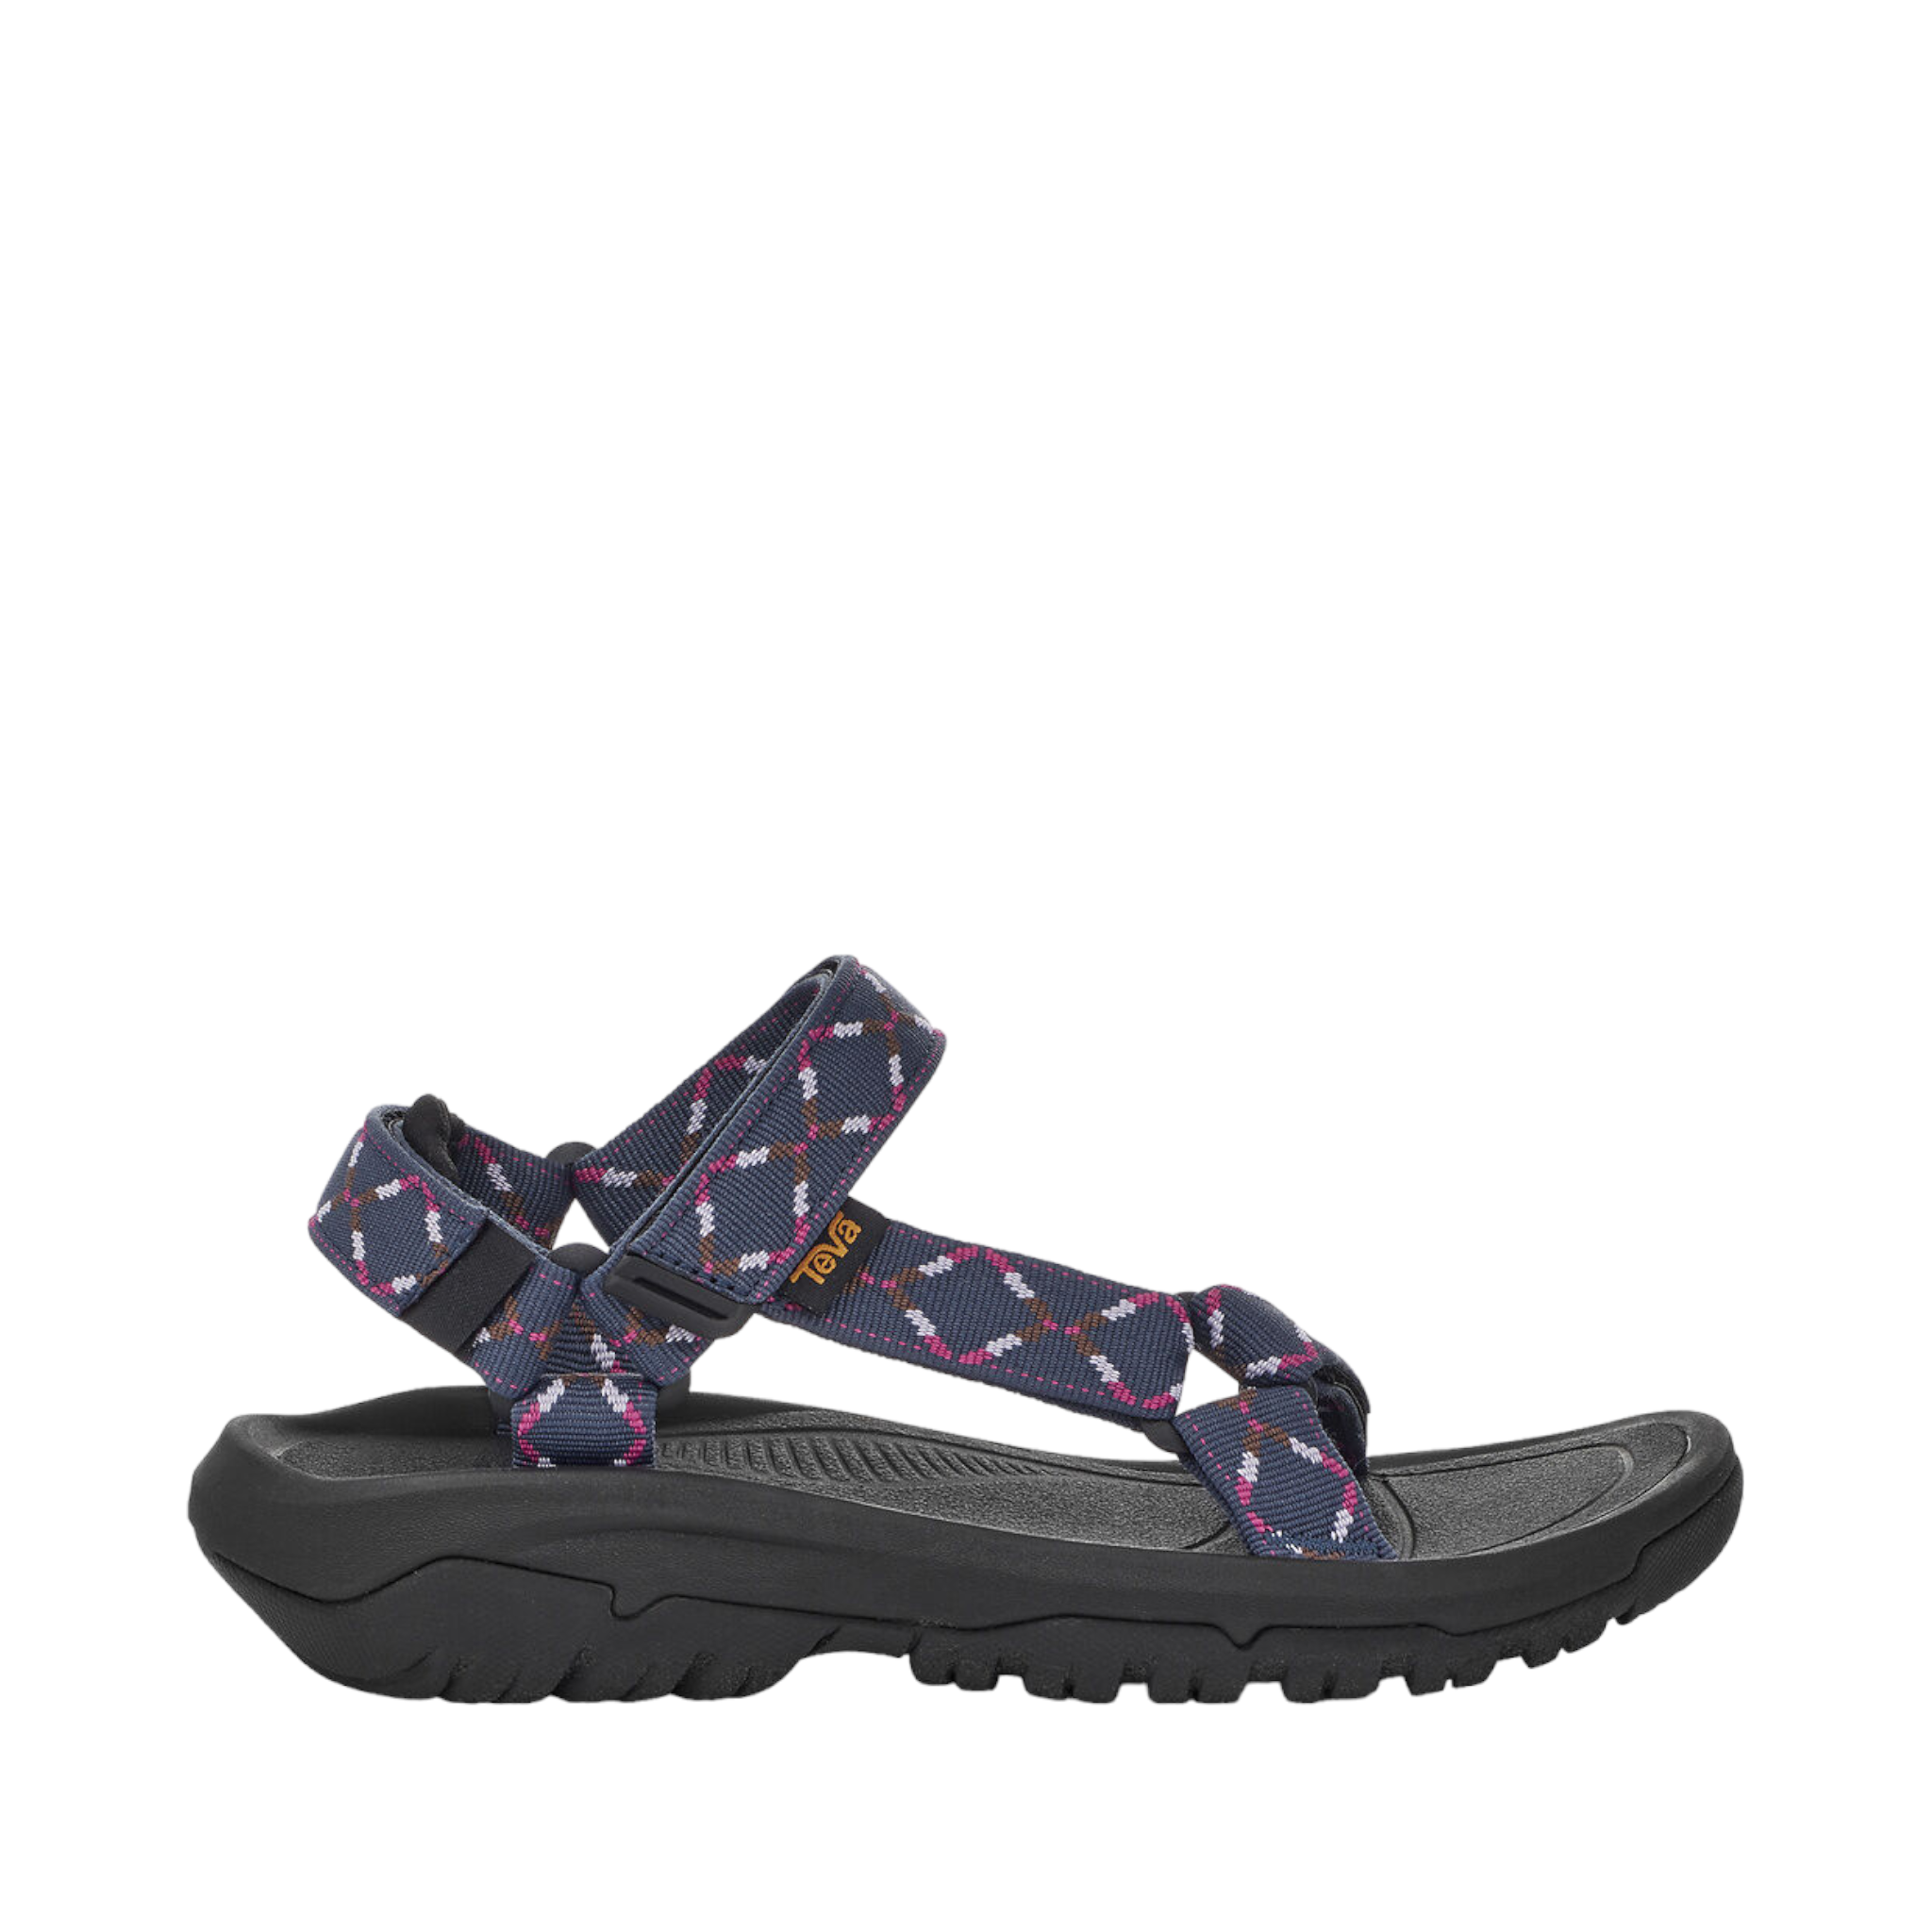 Shop W Hurricane XLT2 - with shoe&amp;me - from Teva - Sandals - Sandals, Summer, Womens - [collection]